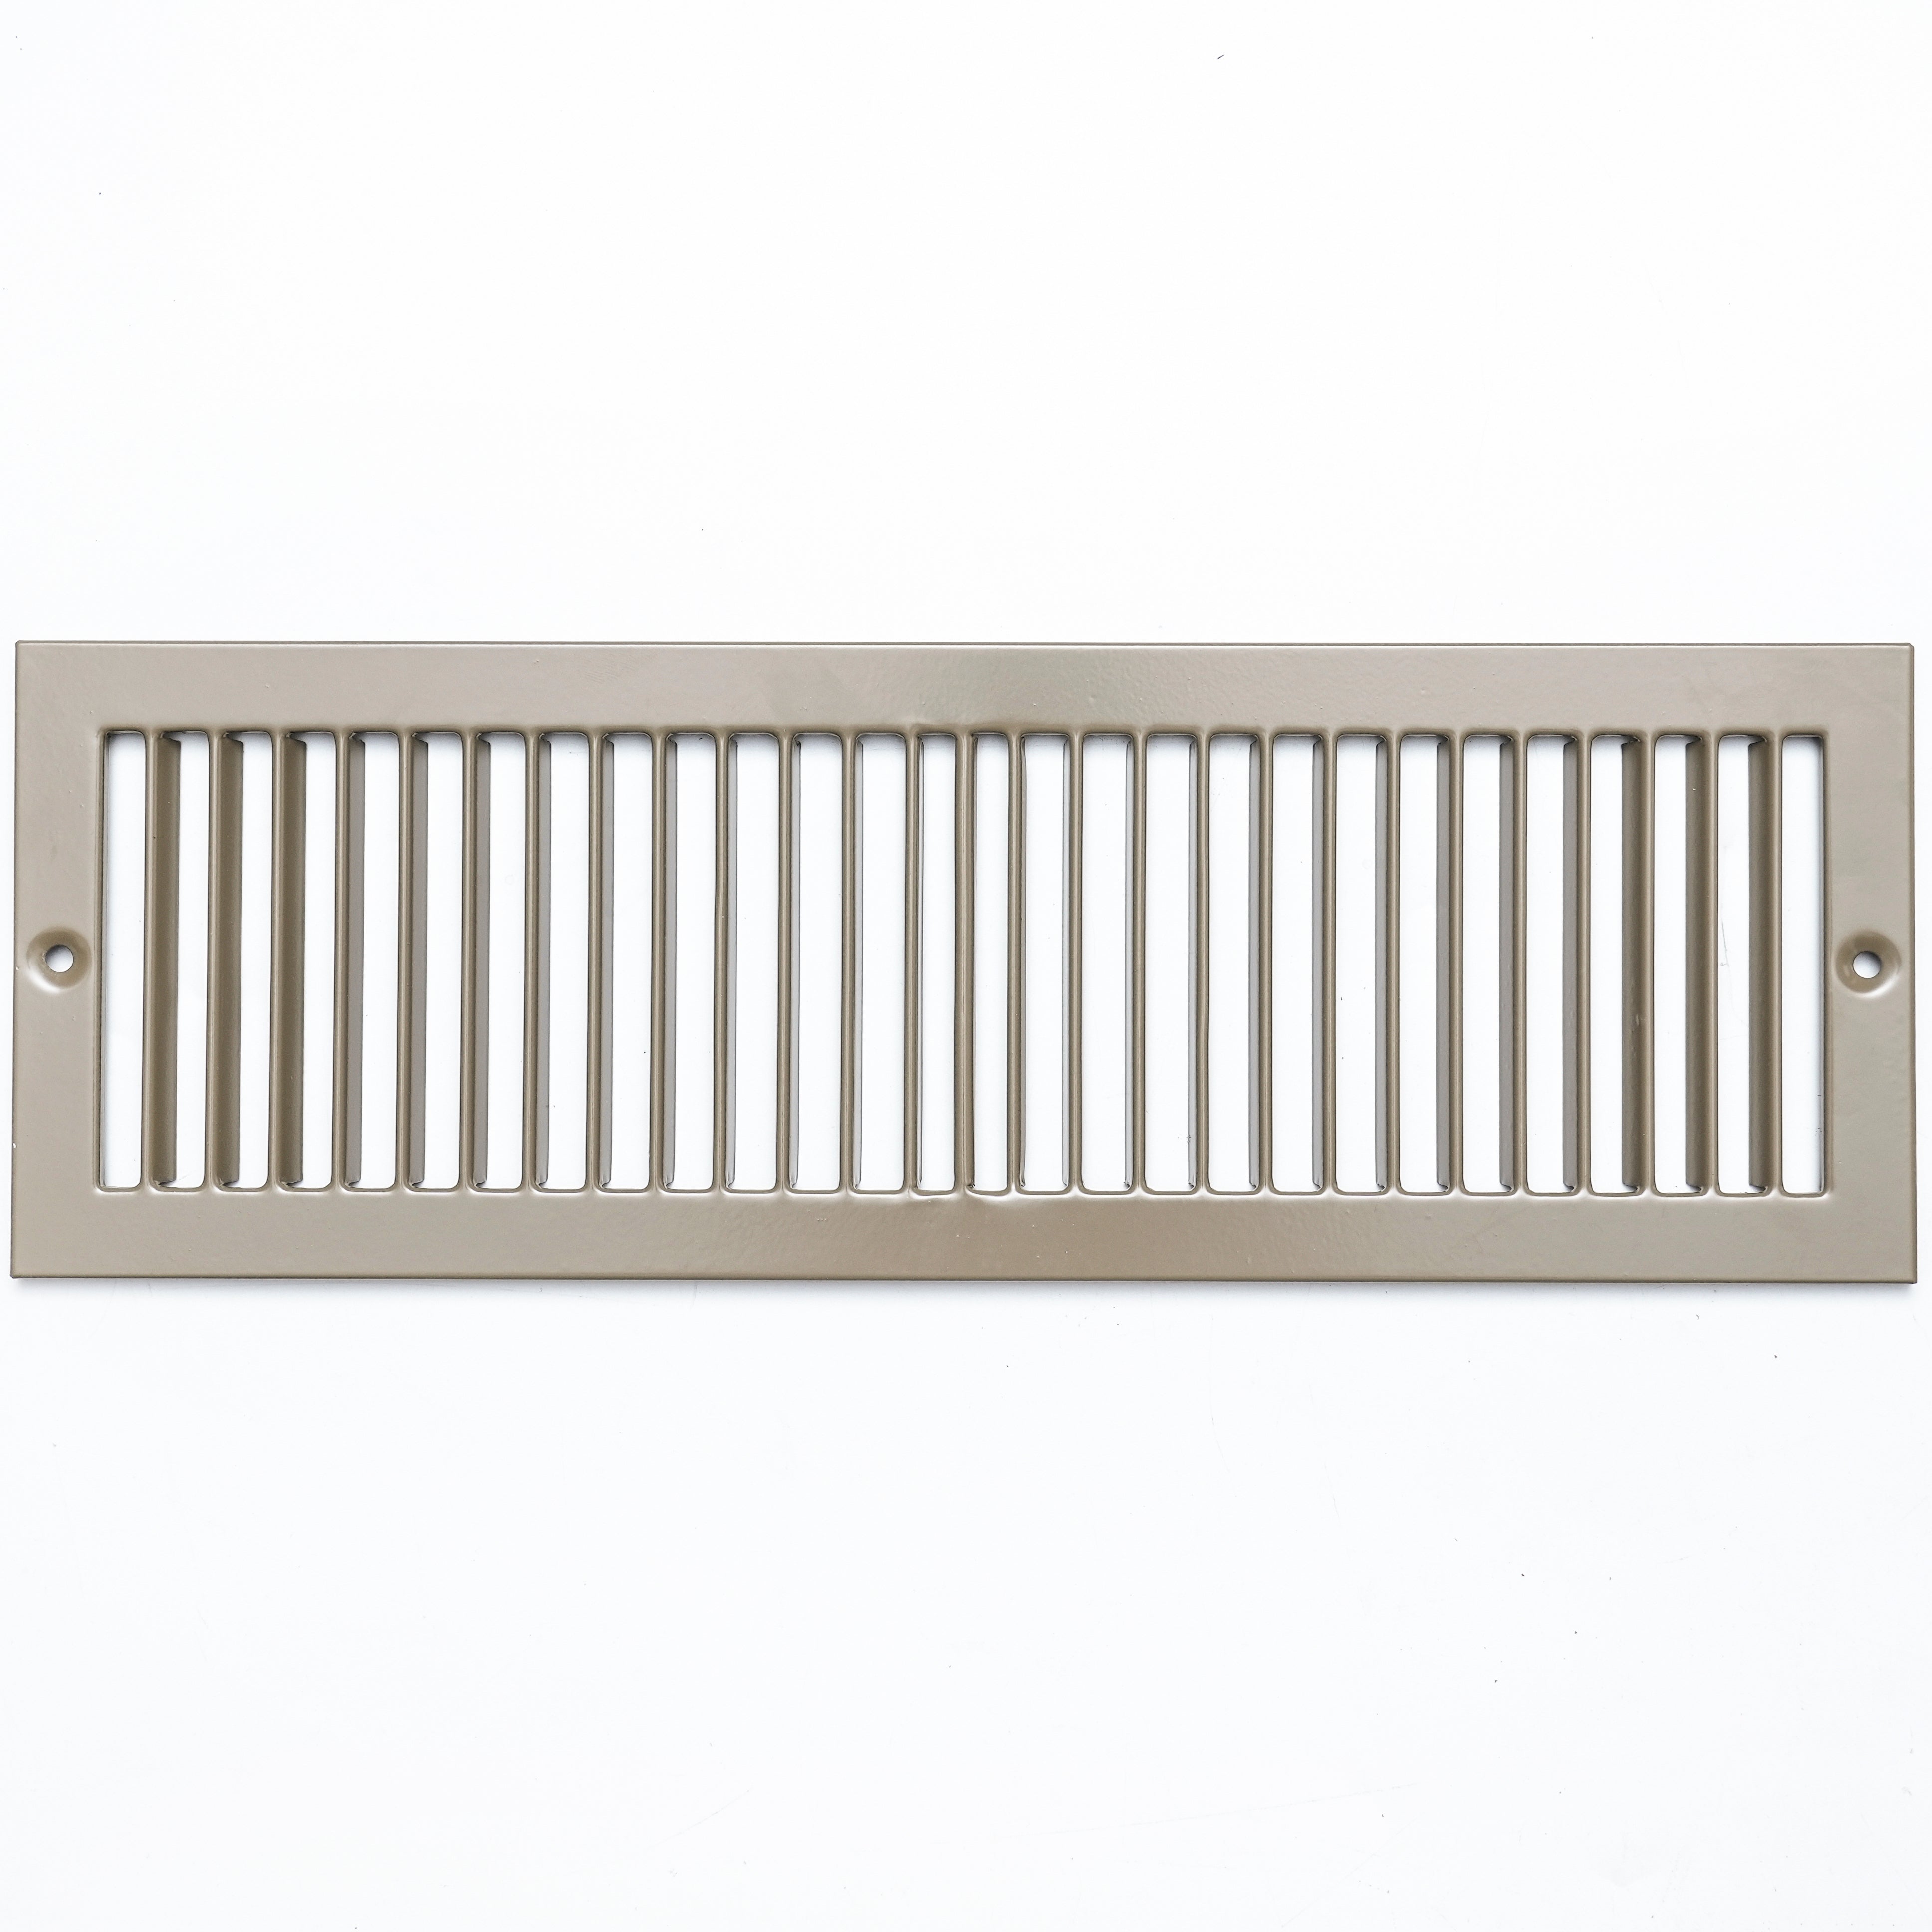 airgrilles 4" x 14" toe kick register grille vent cover outer dimensions: 5.5" x 15.5" brown hnd-tgs-br-4x14  1